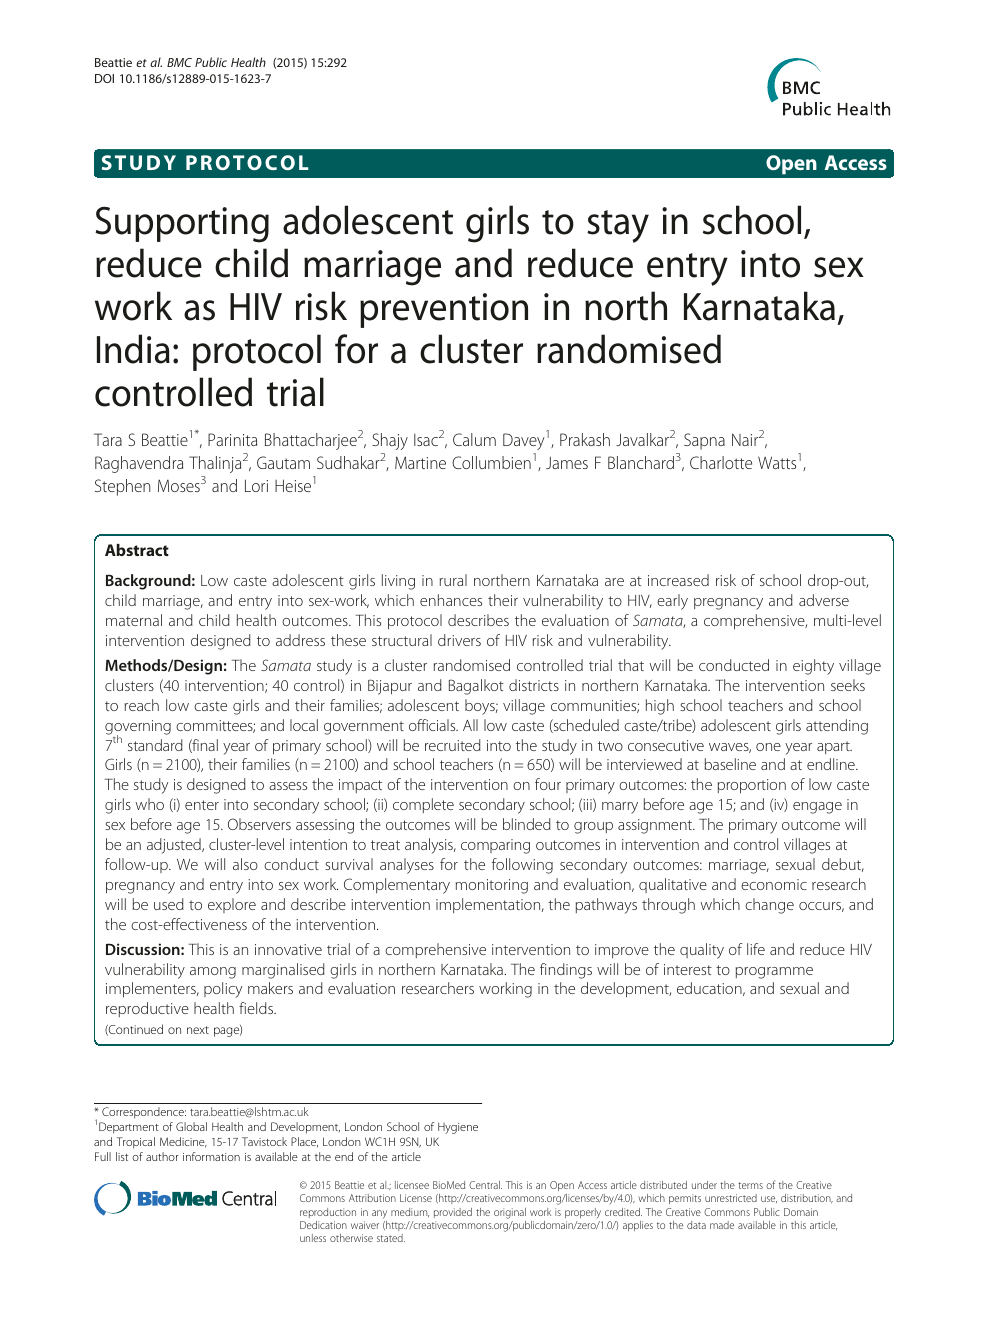 Supporting adolescent girls to stay in school, reduce child marriage and reduce entry into sex work as HIV risk prevention in north Karnataka, India protocol for a cluster randomised controlled trial –